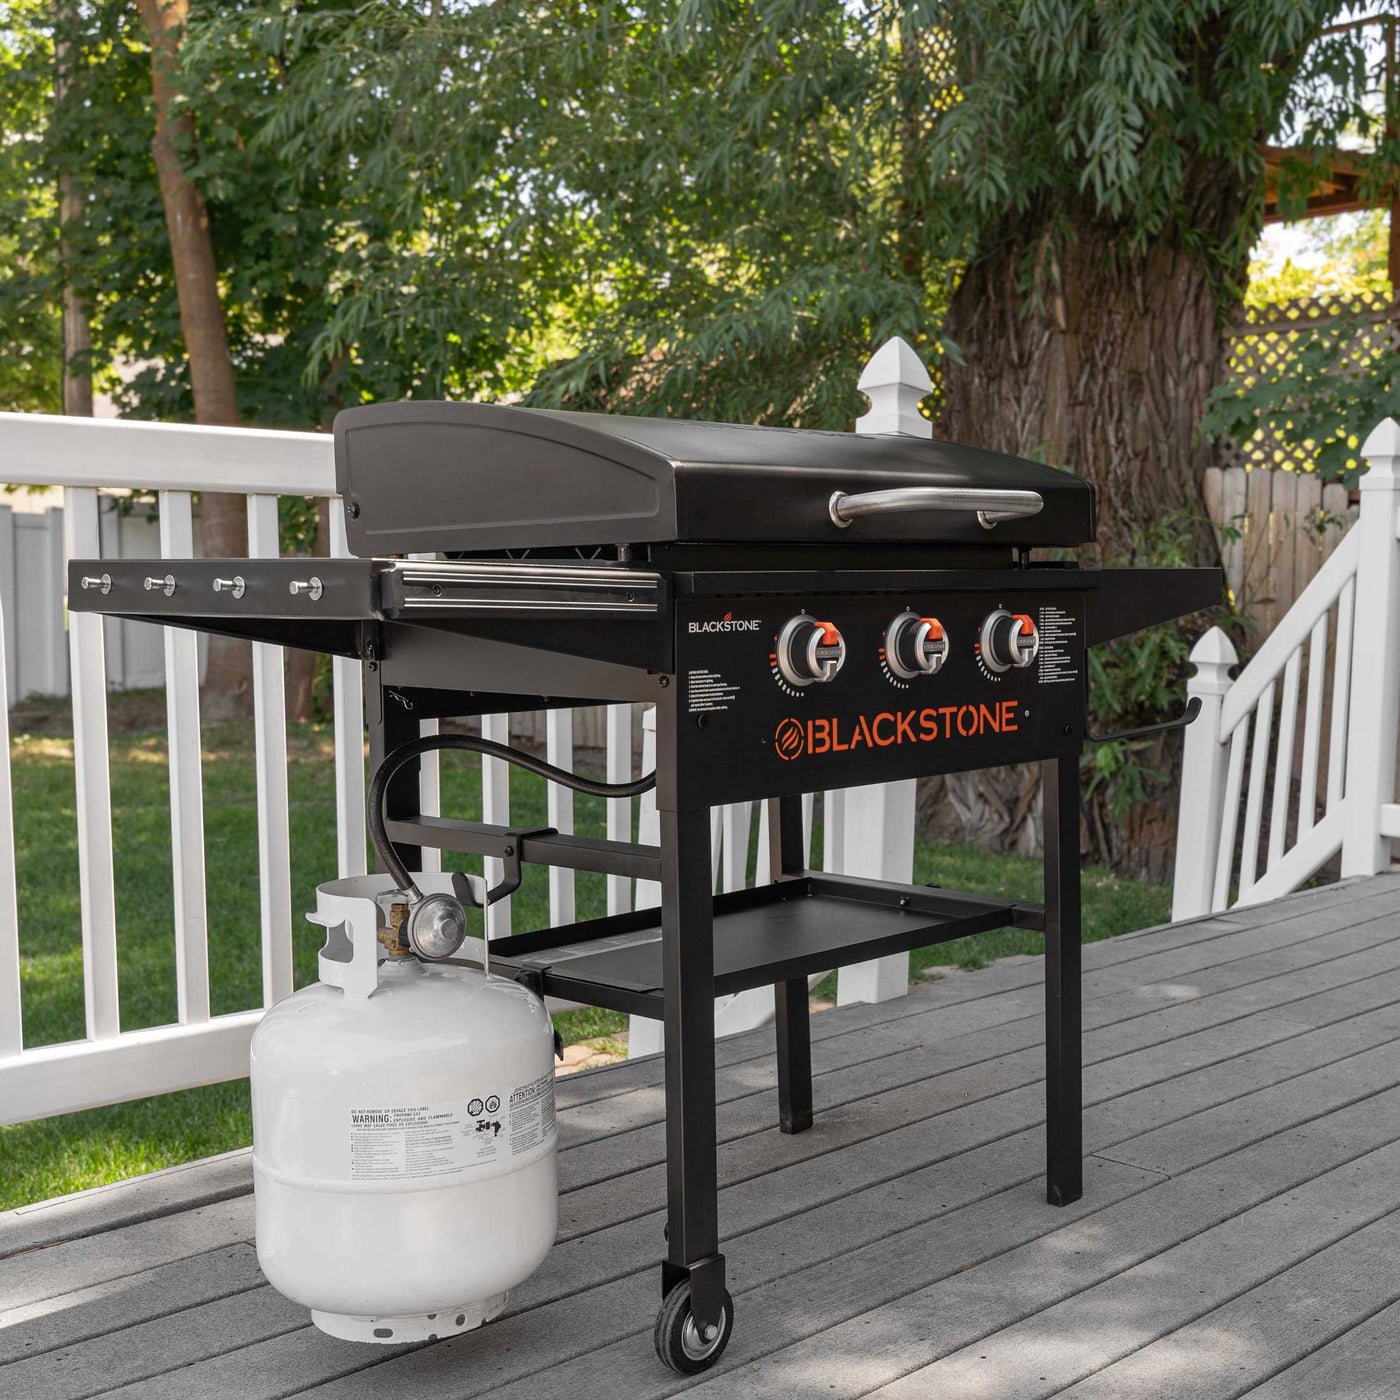 GRILL SEASON IS JUST AROUND THE CORNER, GET YOURS BEFORE THE SUMMER RUSH.